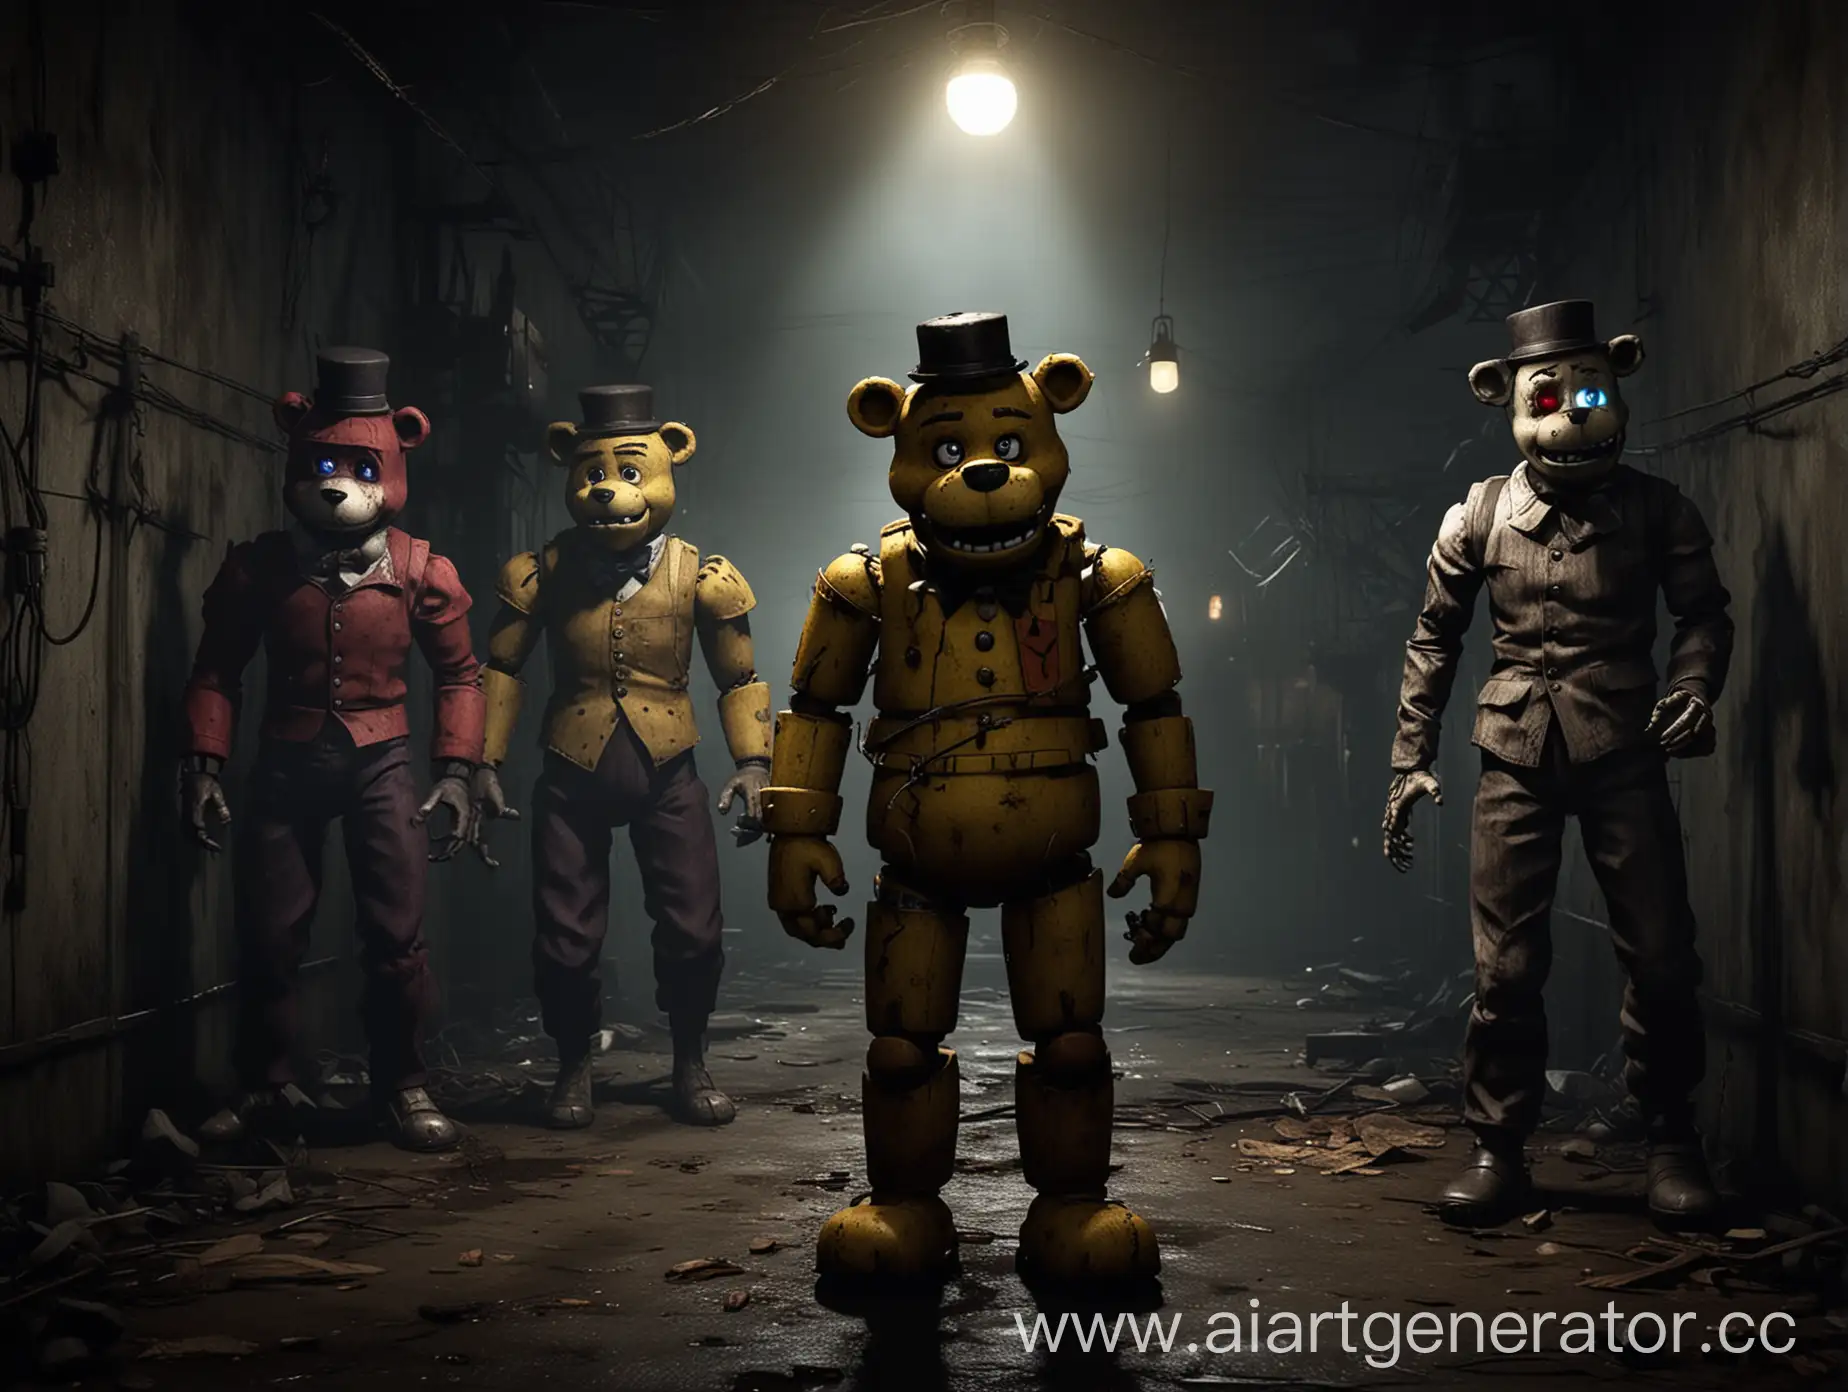 Generate an image for "Animatronics Night: The Seven Trials (Medley)." The scene should depict the animatronics from Five Nights at Freddy's in a dark, eerie setting. Incorporate elements of Electro Swing, Dubstep, EDM, Hard Rock, and Cinematic styles. The atmosphere should be suspenseful and mysterious, with each animatronic (Freddy, Bonnie, Chica, Foxy, Golden Freddy, and the Night Guard) portrayed in a haunting yet captivating manner. Include subtle lighting effects to highlight the tension and drama, blending shadows and light for a dramatic, spooky feel.